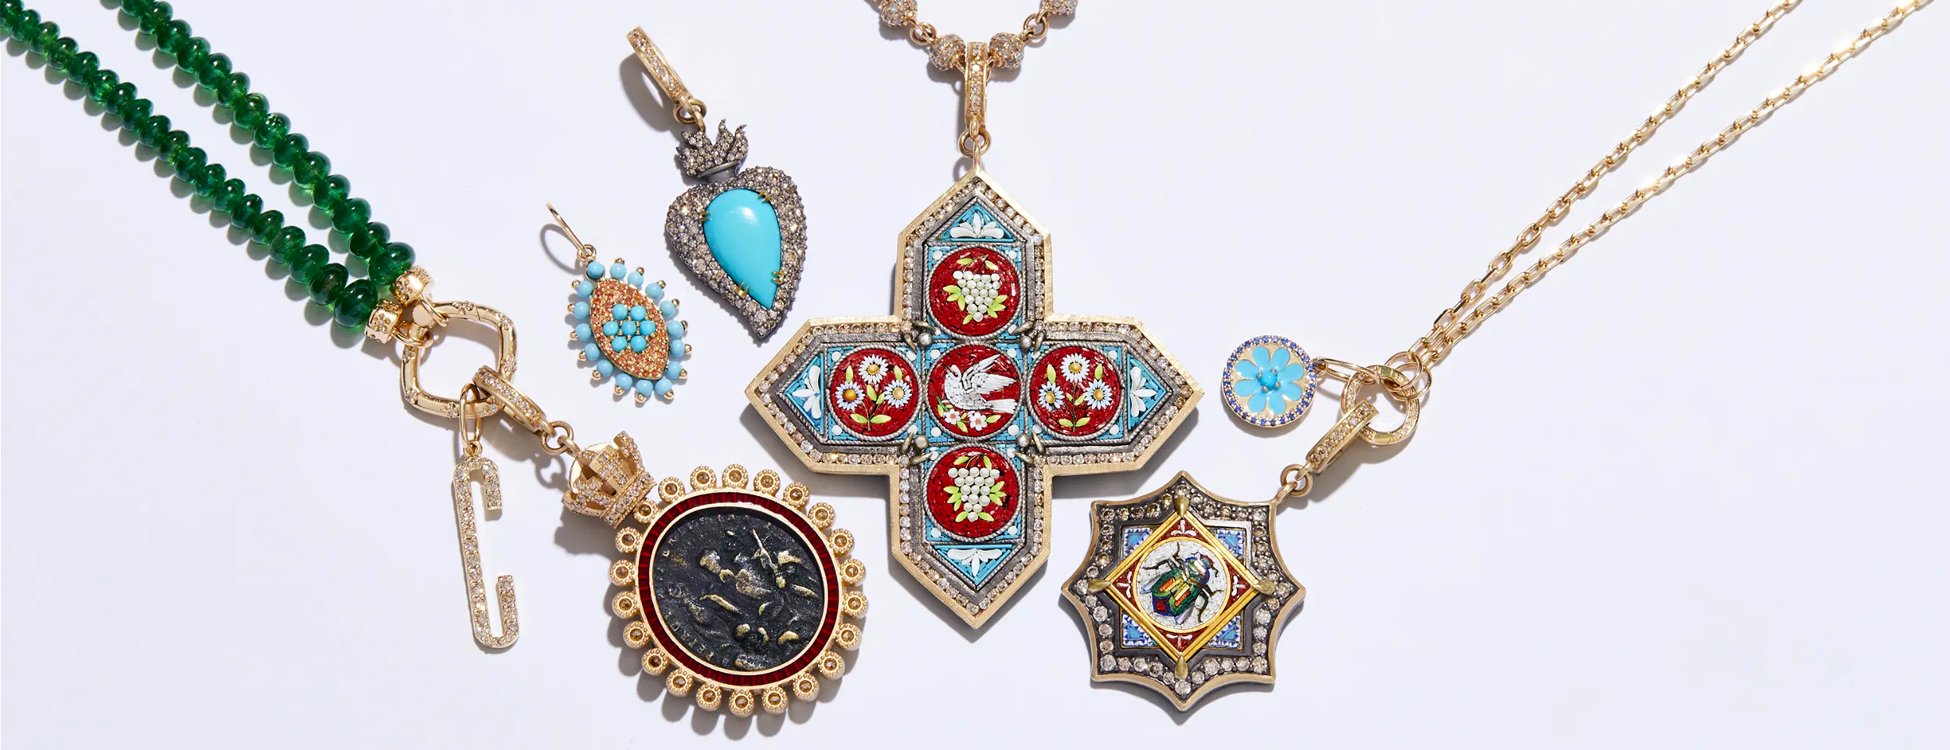 Cynthia Ann Jewels Ancient + Old Medallions